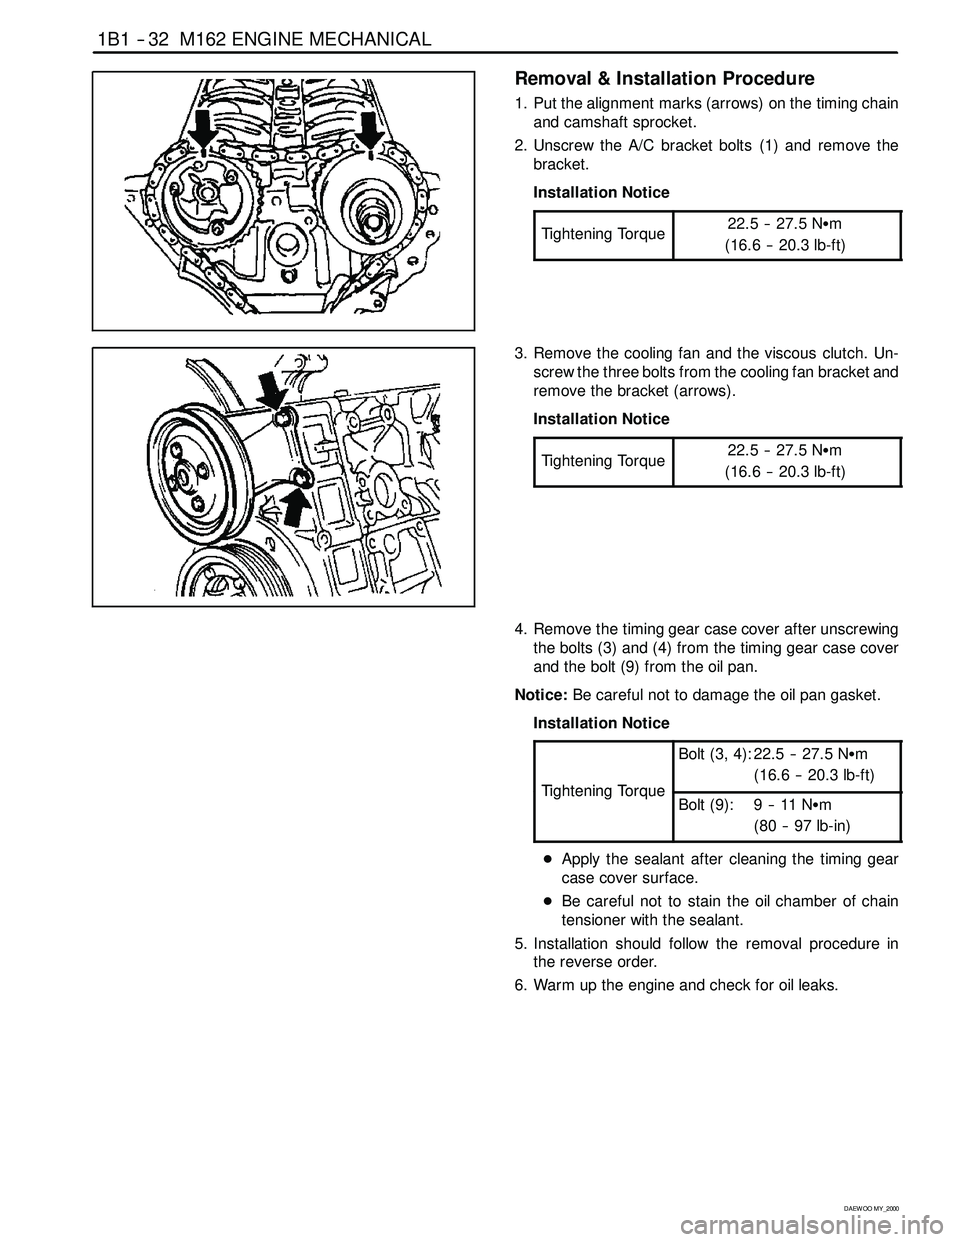 SSANGYONG KORANDO 1997  Service Repair Manual 1B1 -- 32 M162 ENGINE MECHANICAL
D AEW OO M Y_2000
Removal & Installation Procedure
1. Put the alignment marks (arrows) on the timing chain
and camshaft sprocket.
2. Unscrew the A/C bracket bolts (1) 